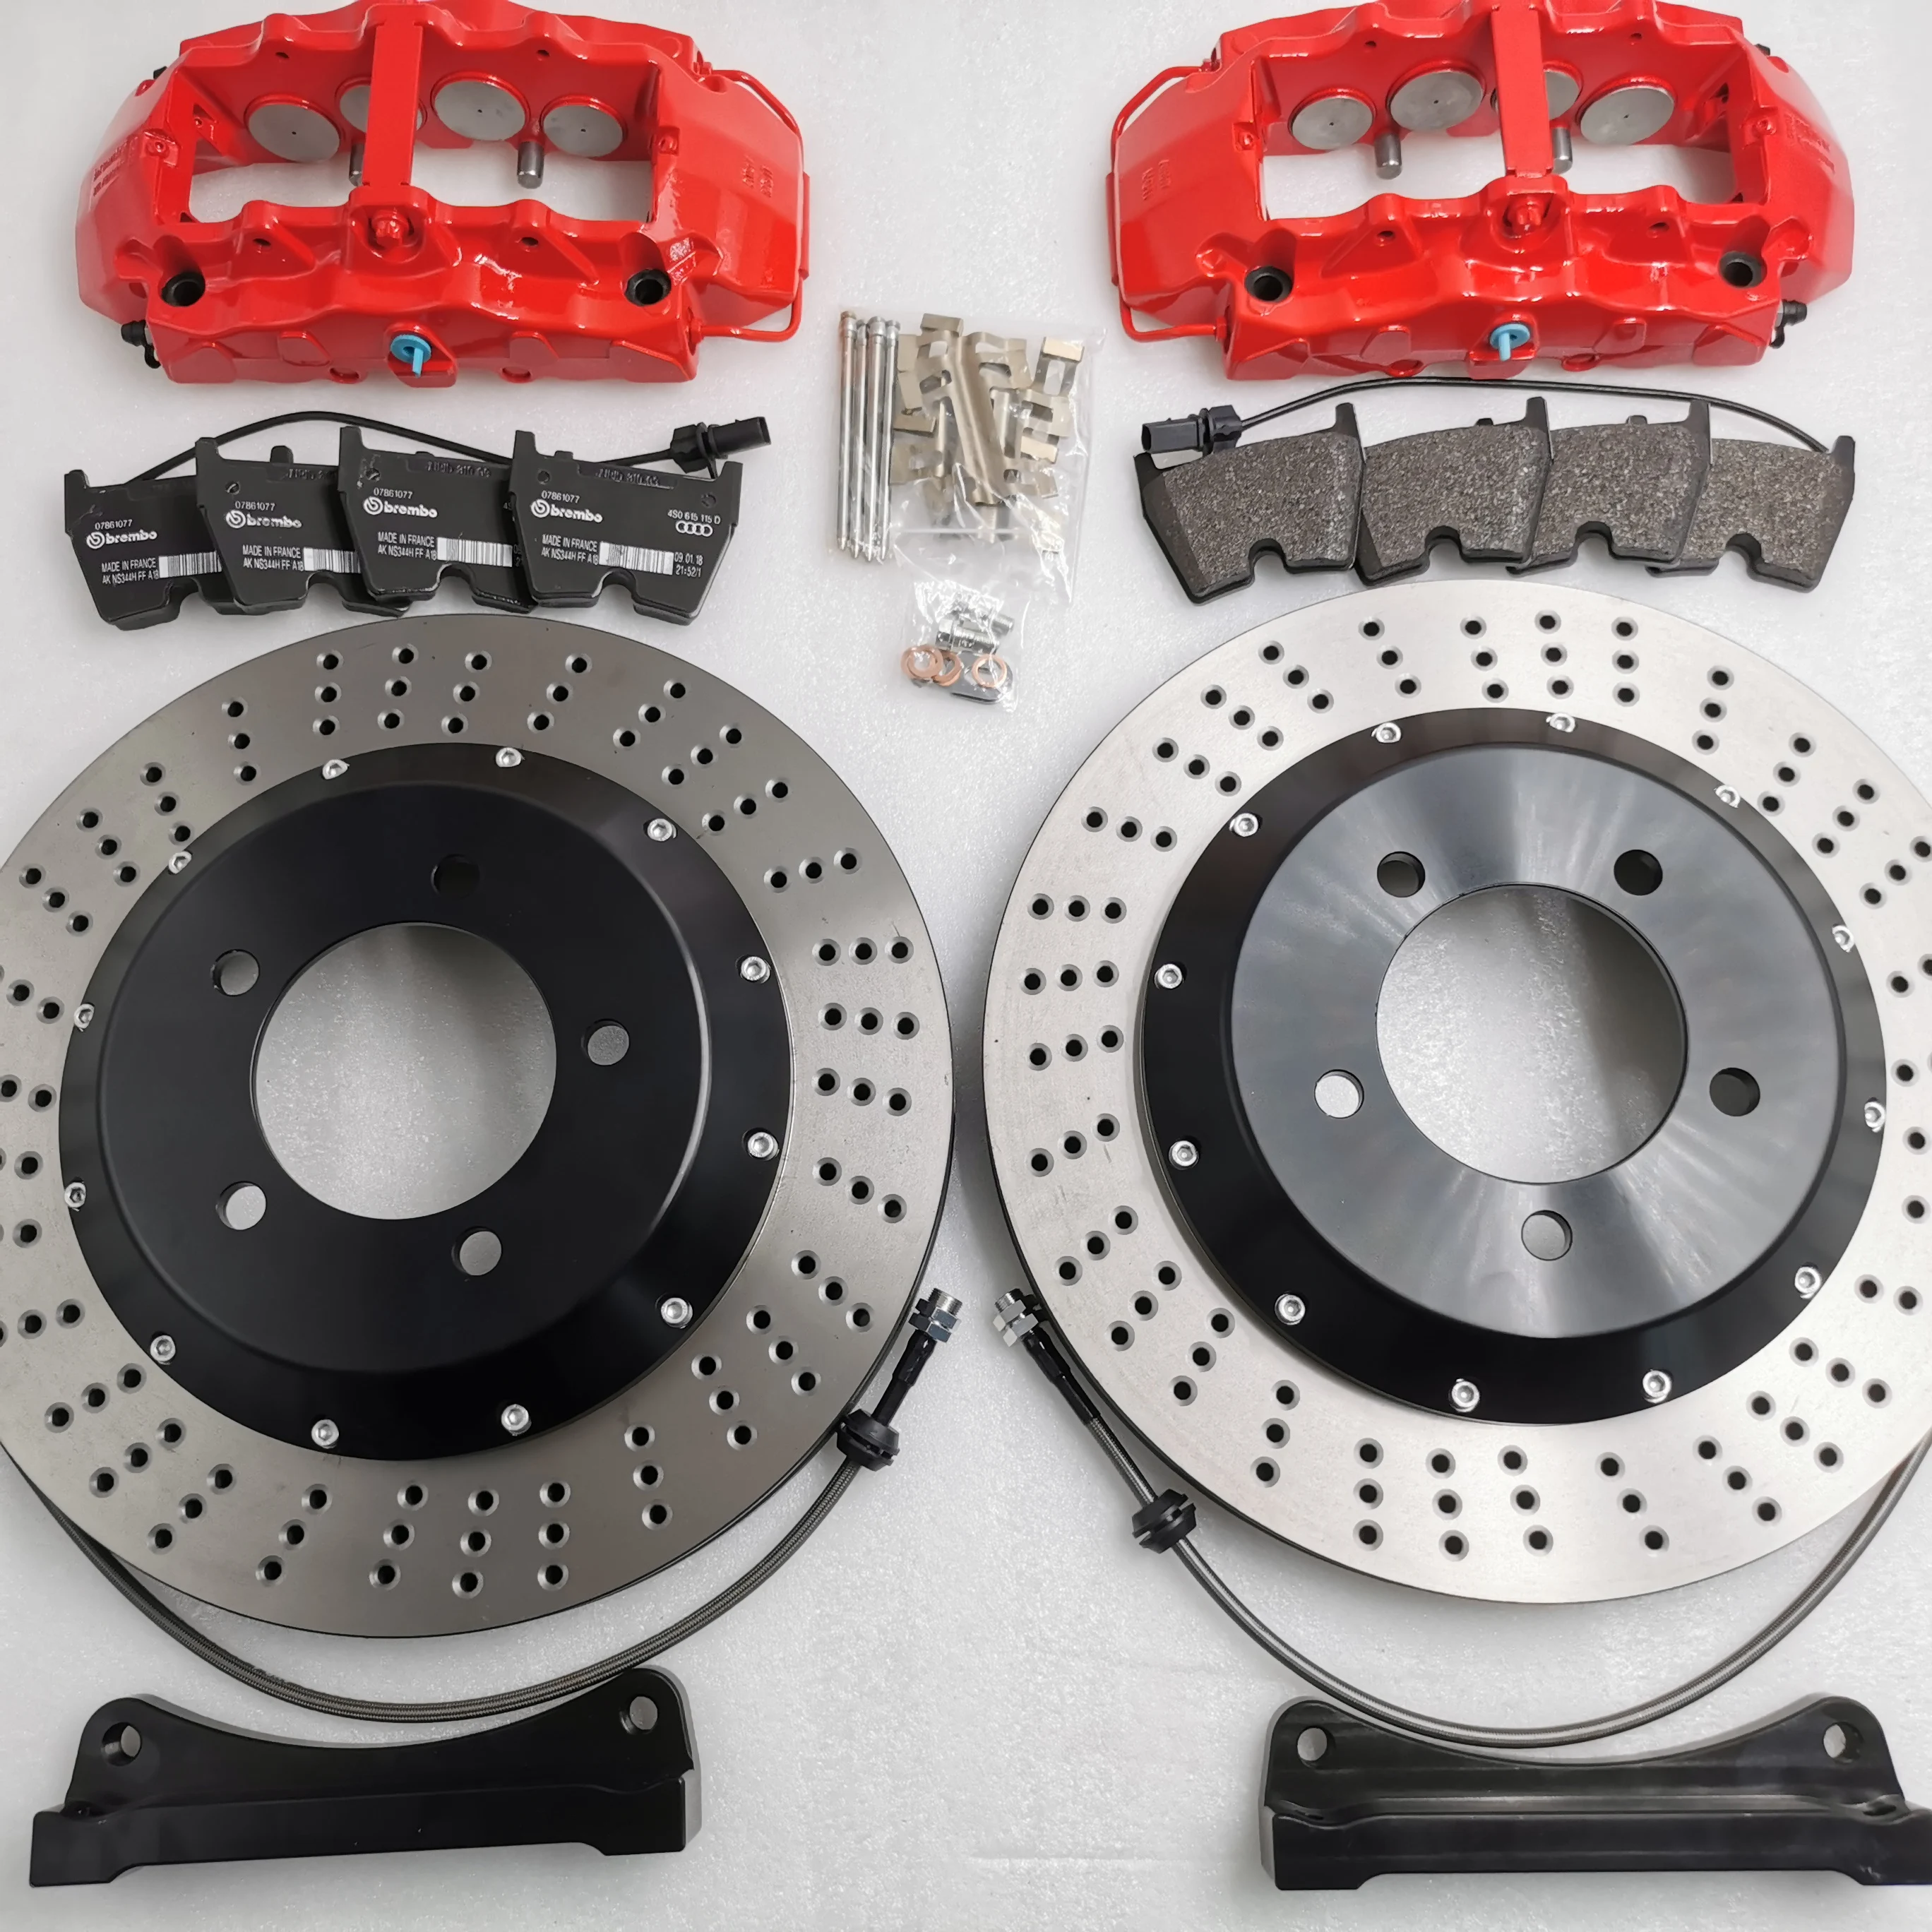 

Jekit good performance GT8 405*34mm kit with GT4 380*28mm drum brake kit for 2019 Cadillac Escalade